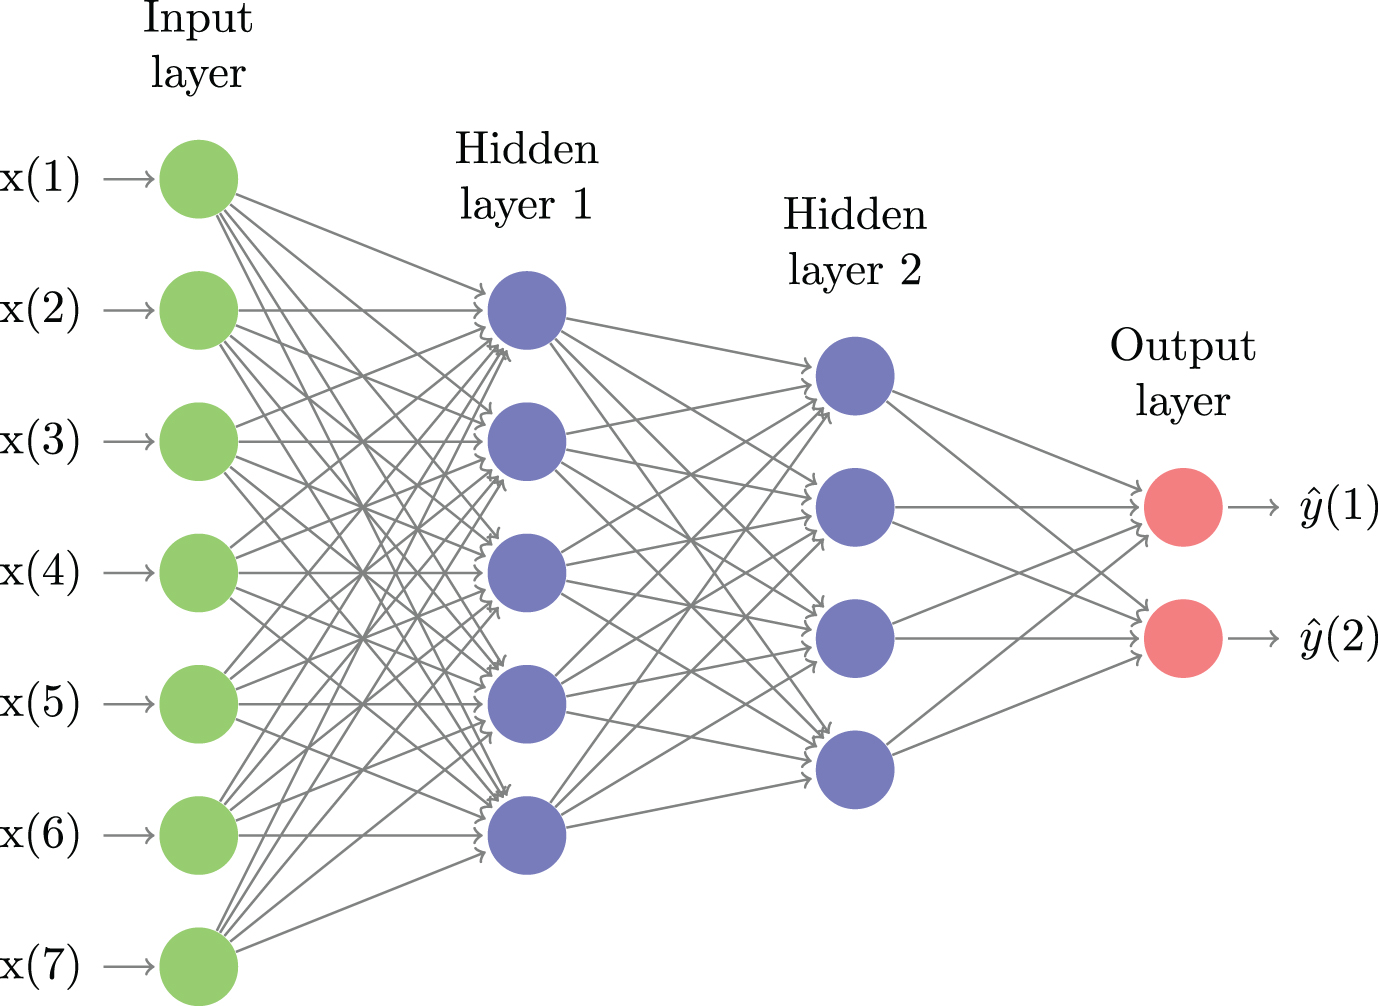 An illustrative example of a feed-forward neural network with two hidden layers, seven features and two output states. Deep learning network classifiers typically have many more layers, use a large number of features and several output states or classes. The goal of learning is to find the weight on every edge that minimizes the out-of-sample error measure.